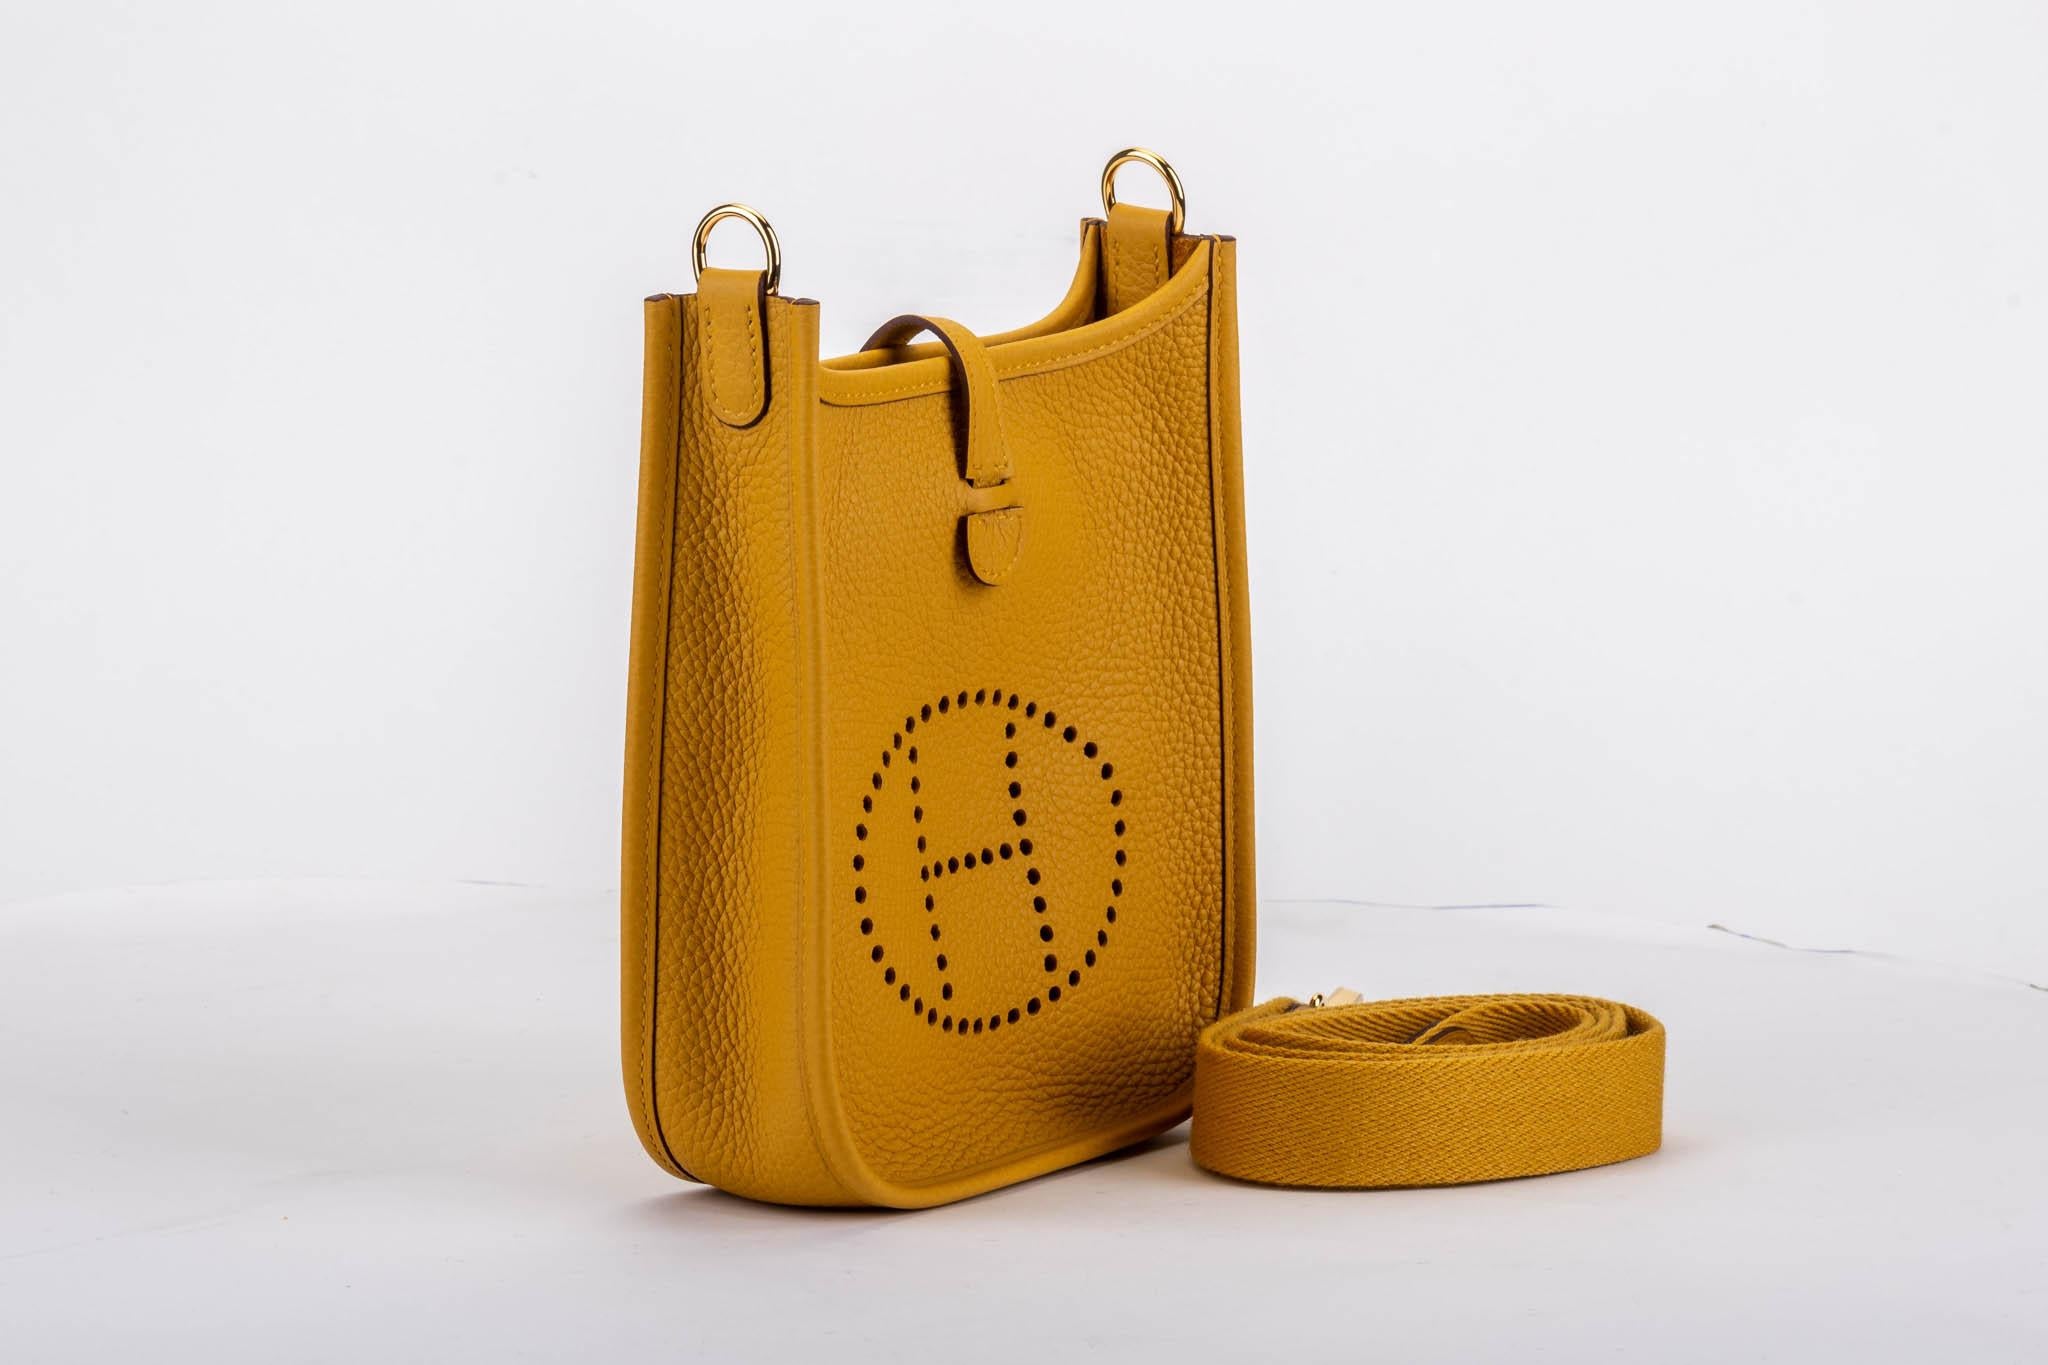 Hermès mini Evelyne bag in jaune ambre clemence leather with gold tone hardware. Shoulder drop, 22.5